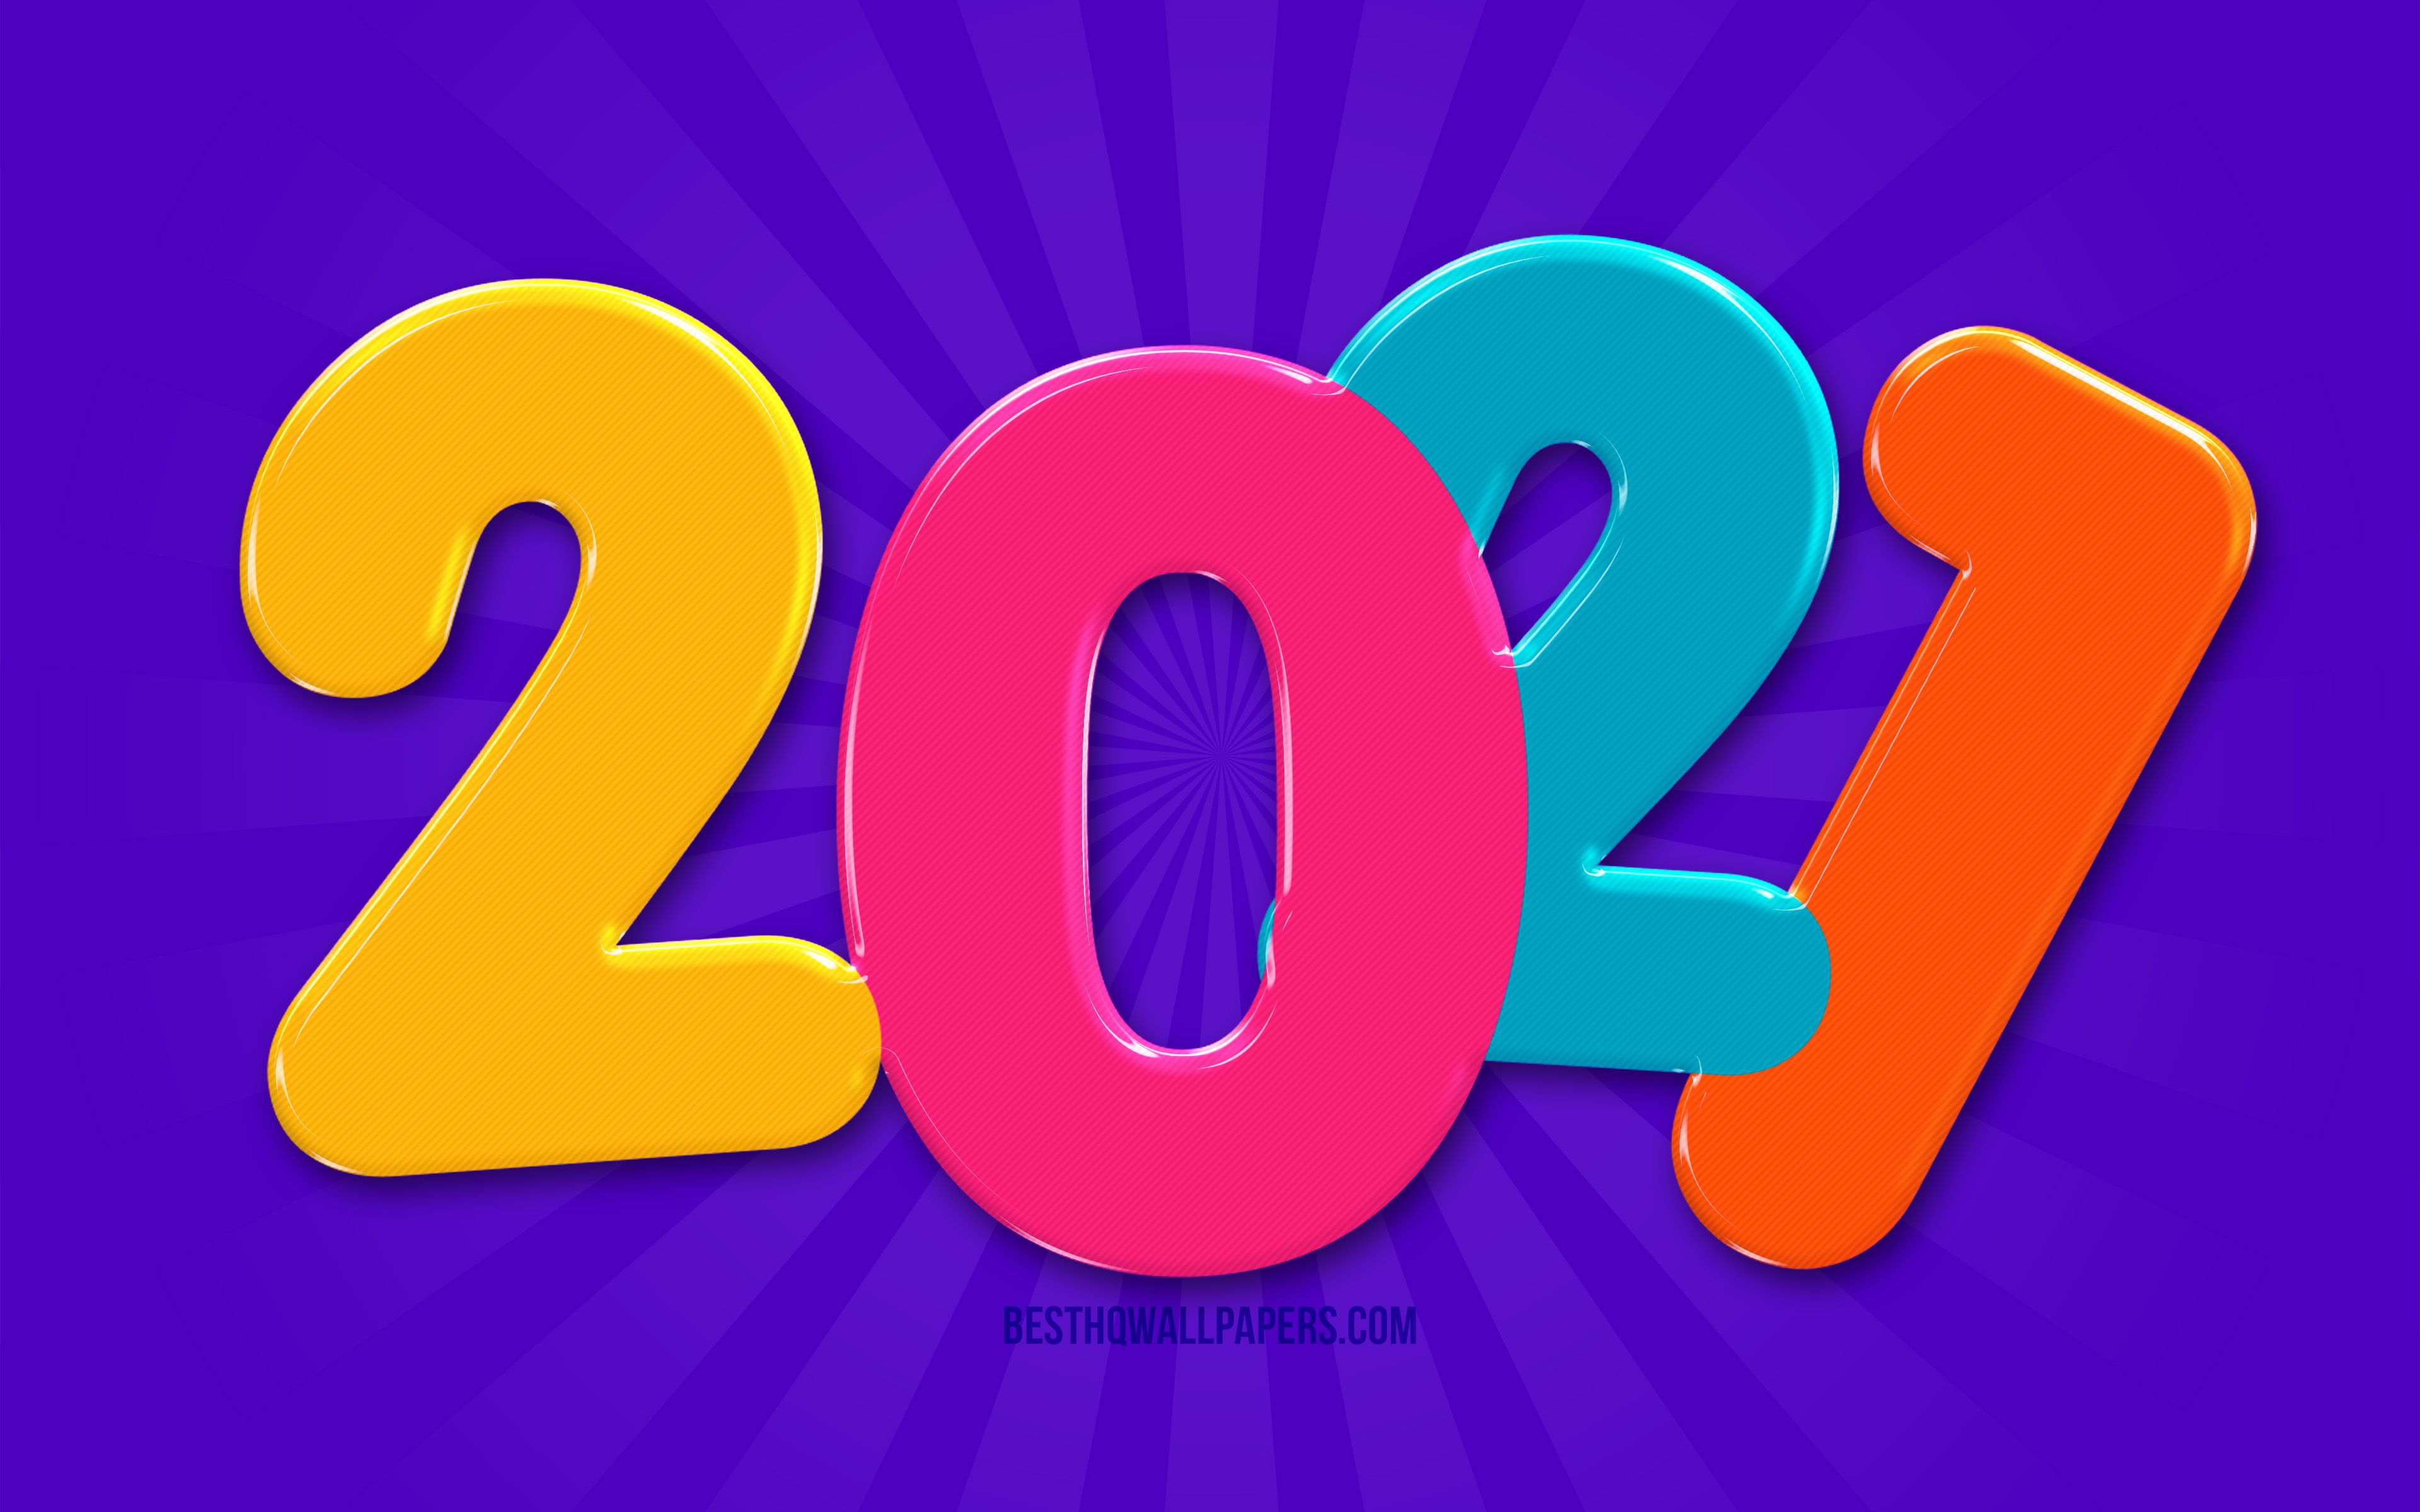 Download wallpaper 4k, New Year abstract rays, colorful 3D digits, 2021 colorful digits, 2021 concepts, 2021 new year, 2021 on violet background, 2021 year digits, Happy New Year 2021 for desktop